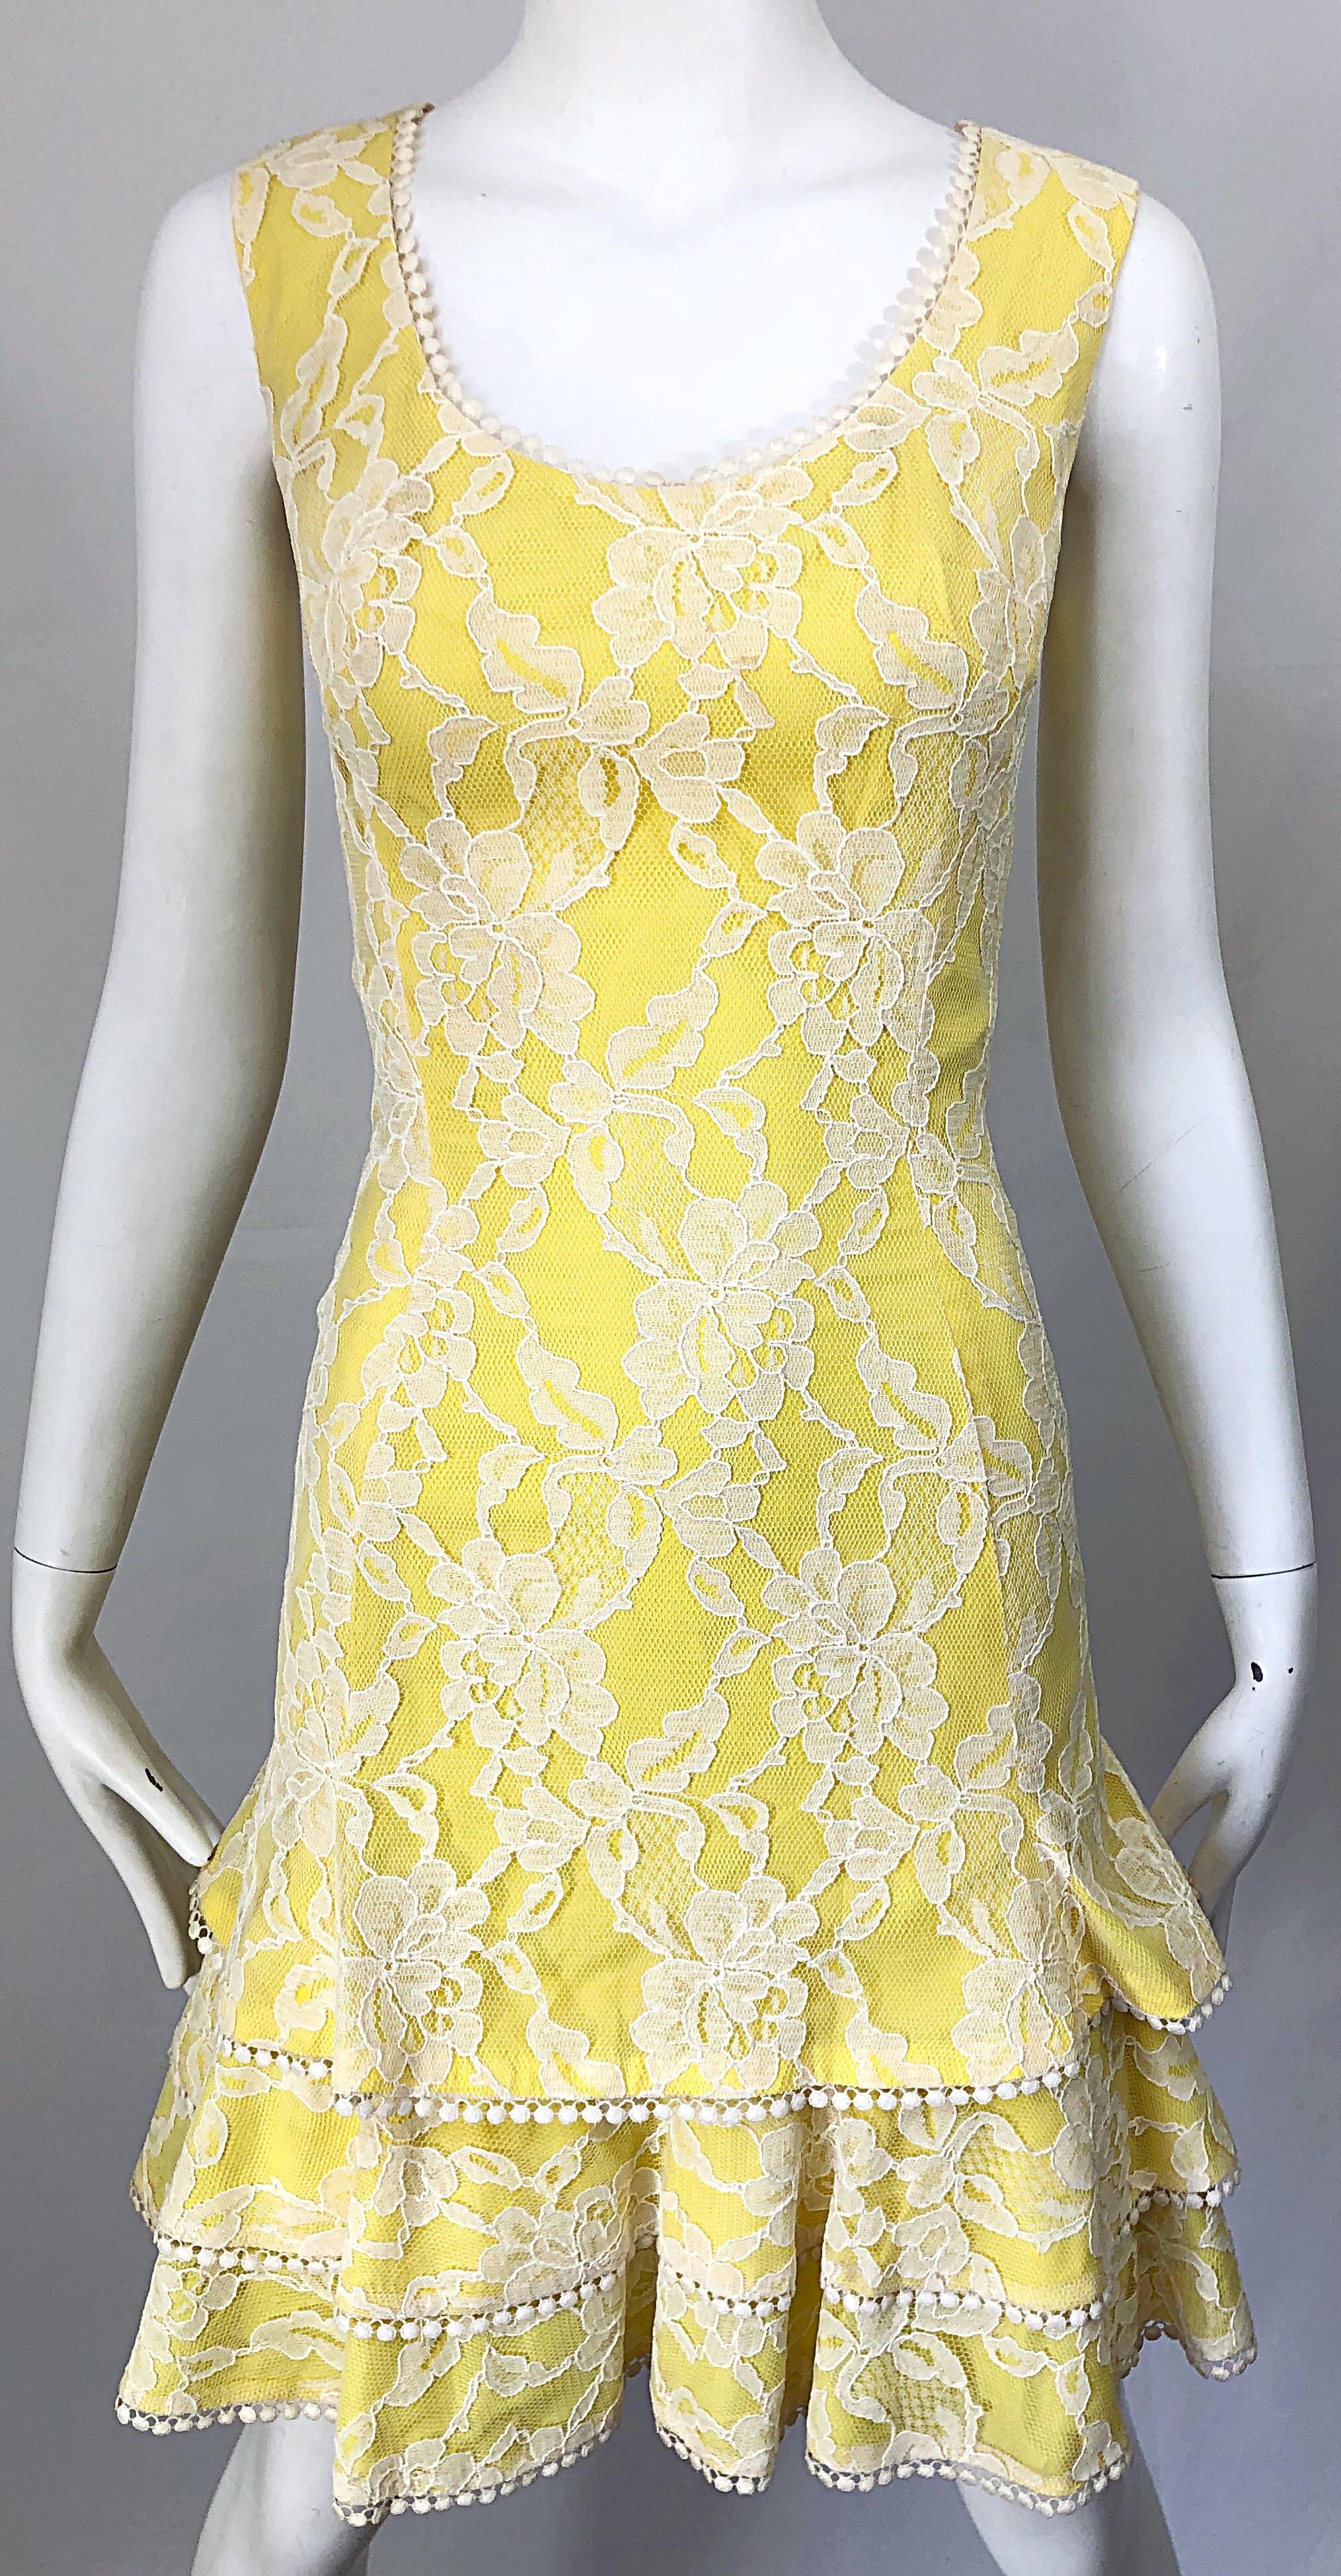 Women's 1960s Lilli Diamond Canary Yellow and White Lace Silk Vintage 60s Dress For Sale